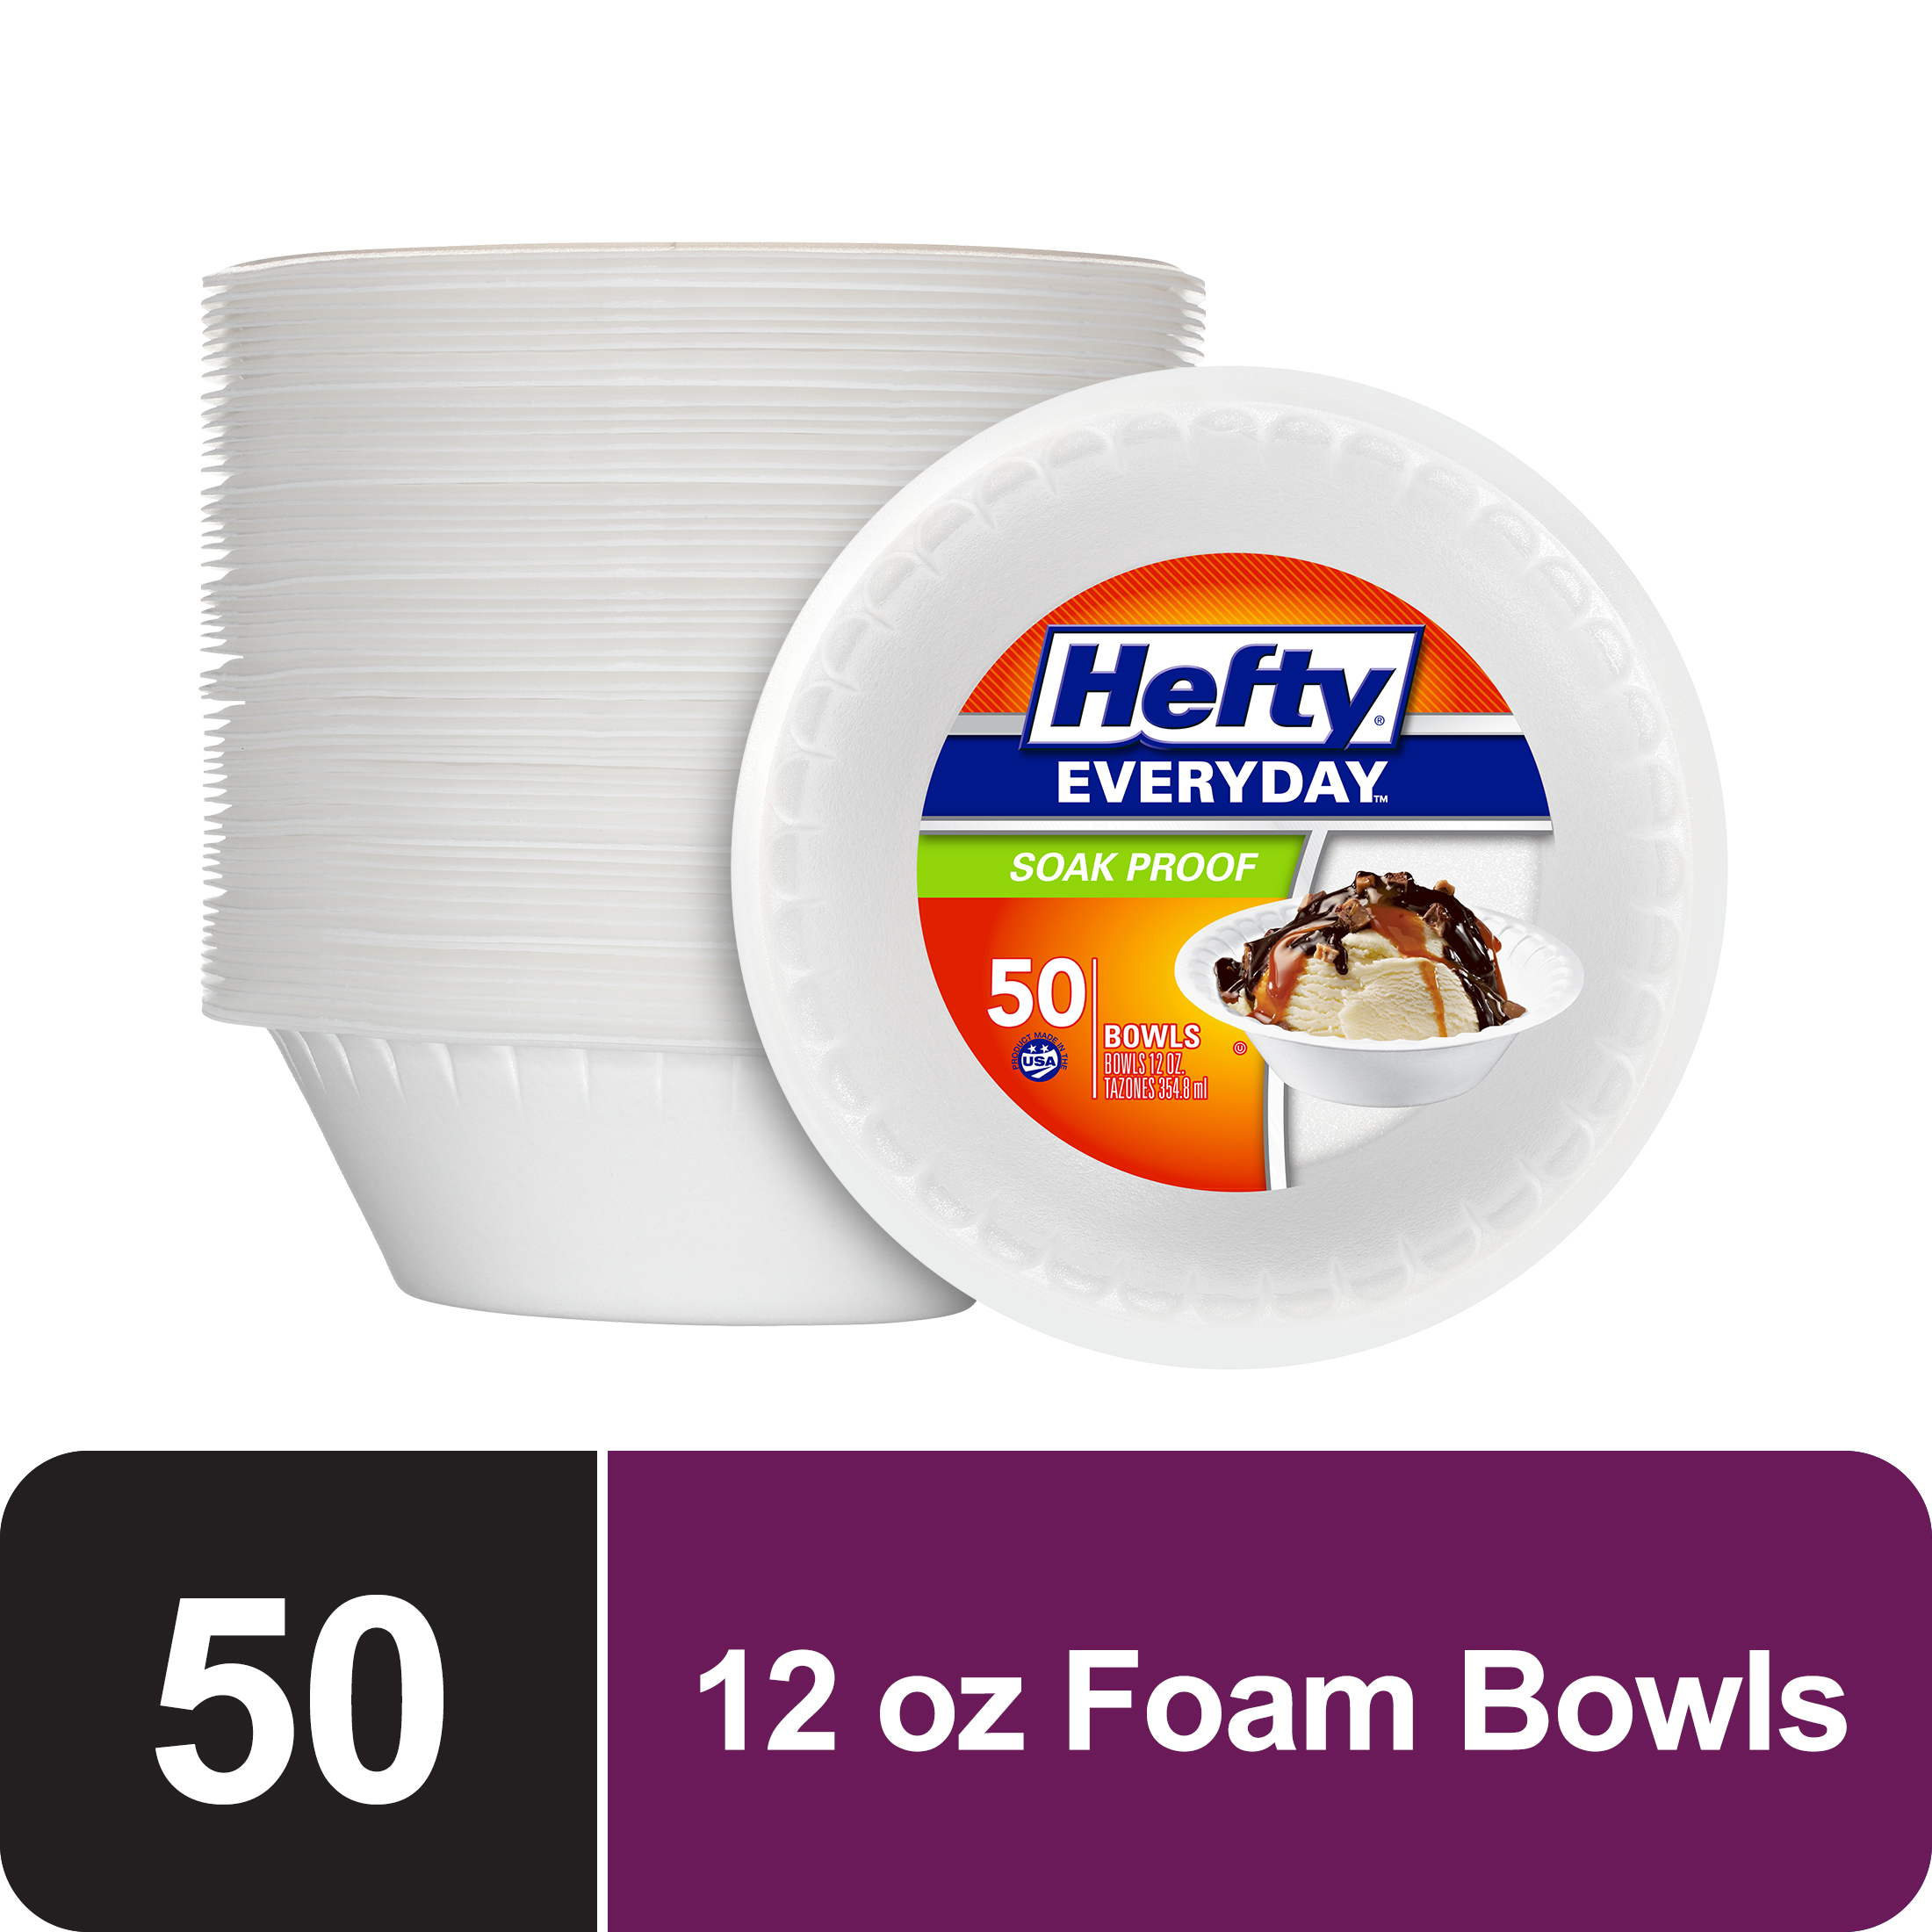 Hefty Everyday Disposable Foam Bowls, 12 oz, 50 ct - image 1 of 5